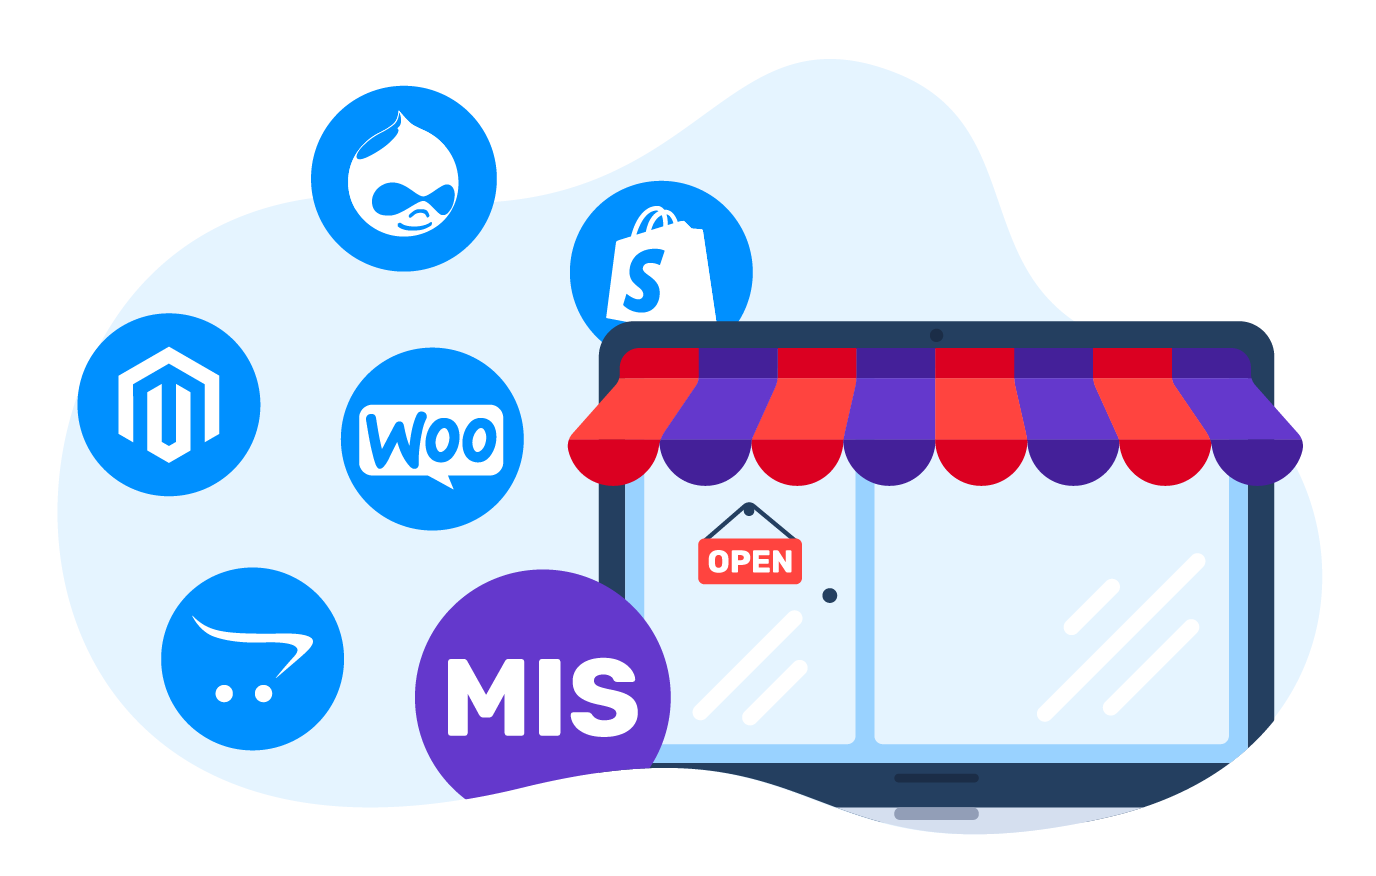 Any e-commerce platform or MIS application